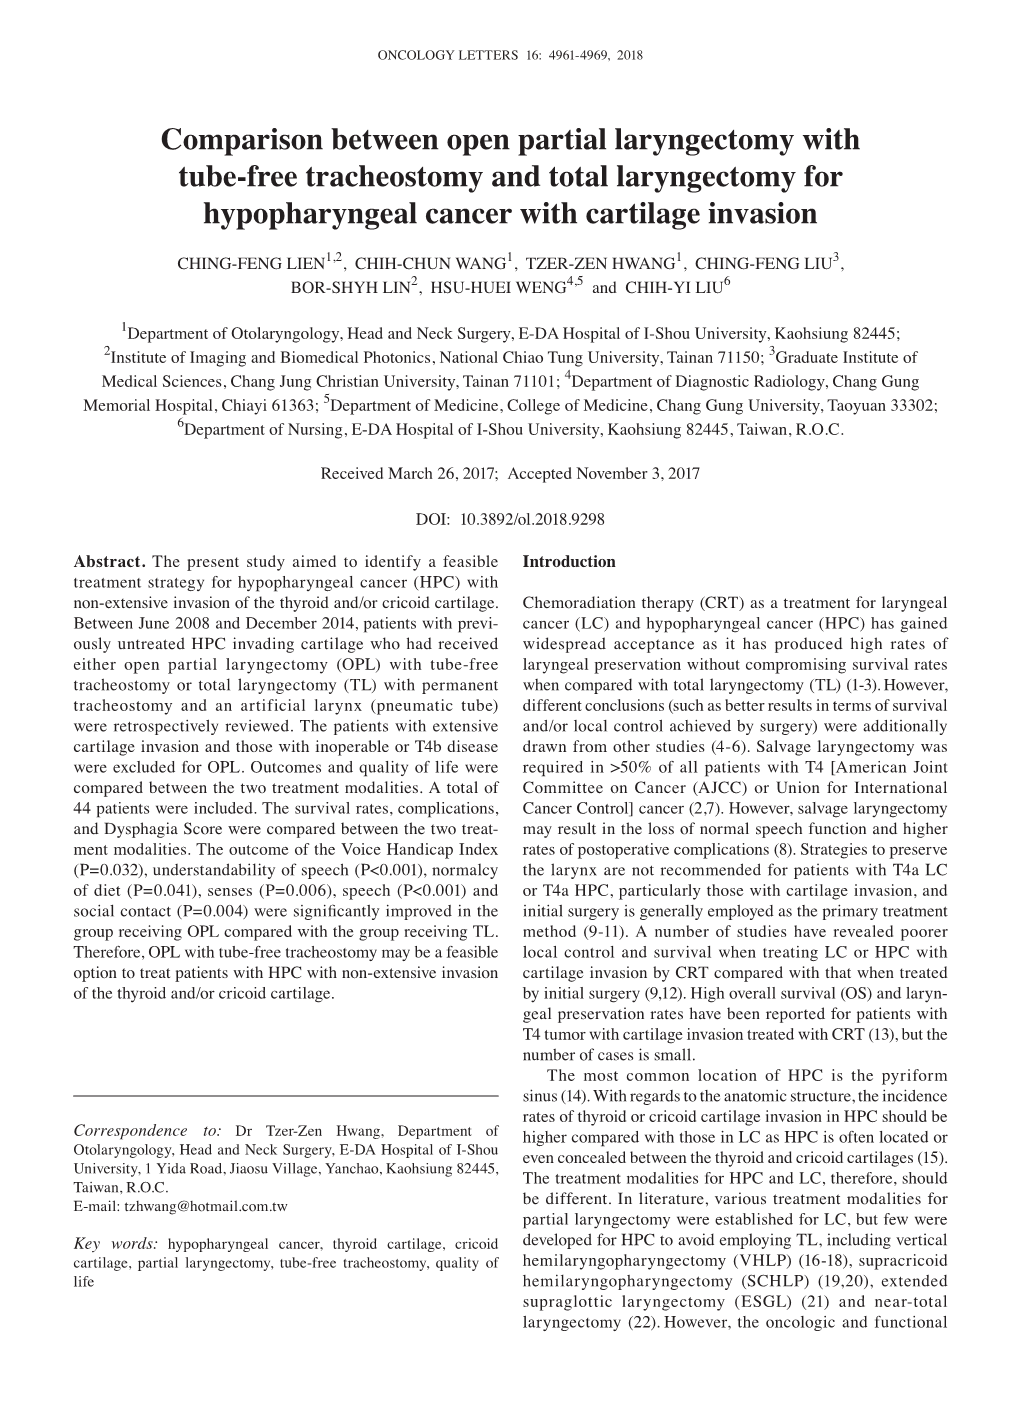 Comparison Between Open Partial Laryngectomy with Tube‑Free Tracheostomy and Total Laryngectomy for Hypopharyngeal Cancer with Cartilage Invasion